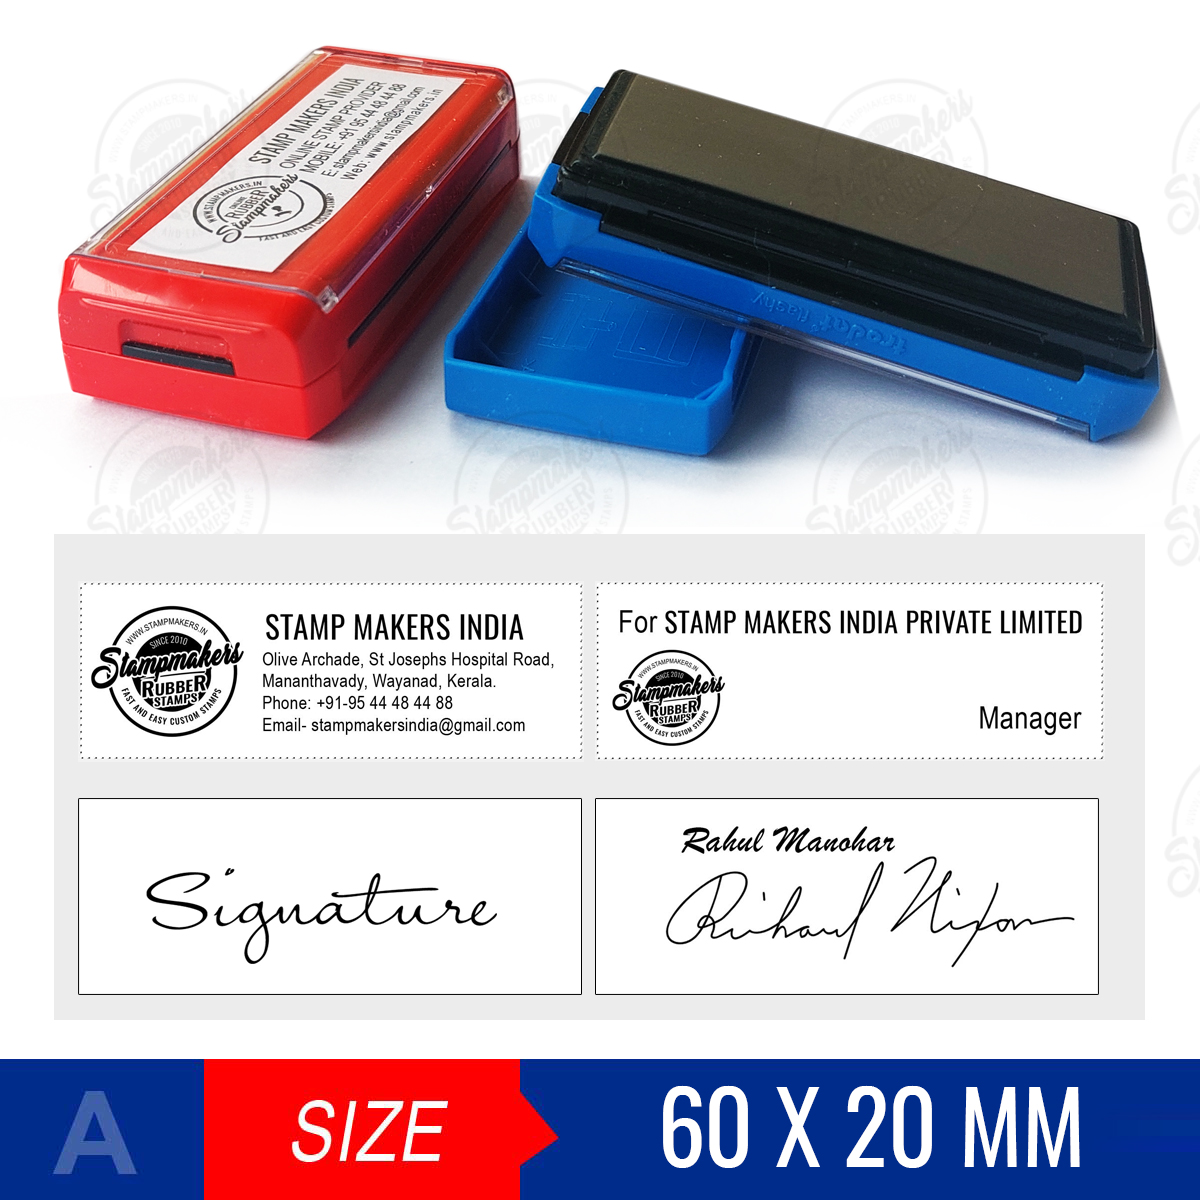 Signature Stamp with Name / Pocket Stamp 60x20 mm :: Online Stamp Makers  India, Stamp Makers Online, Online Rubber Stamp Suppliers